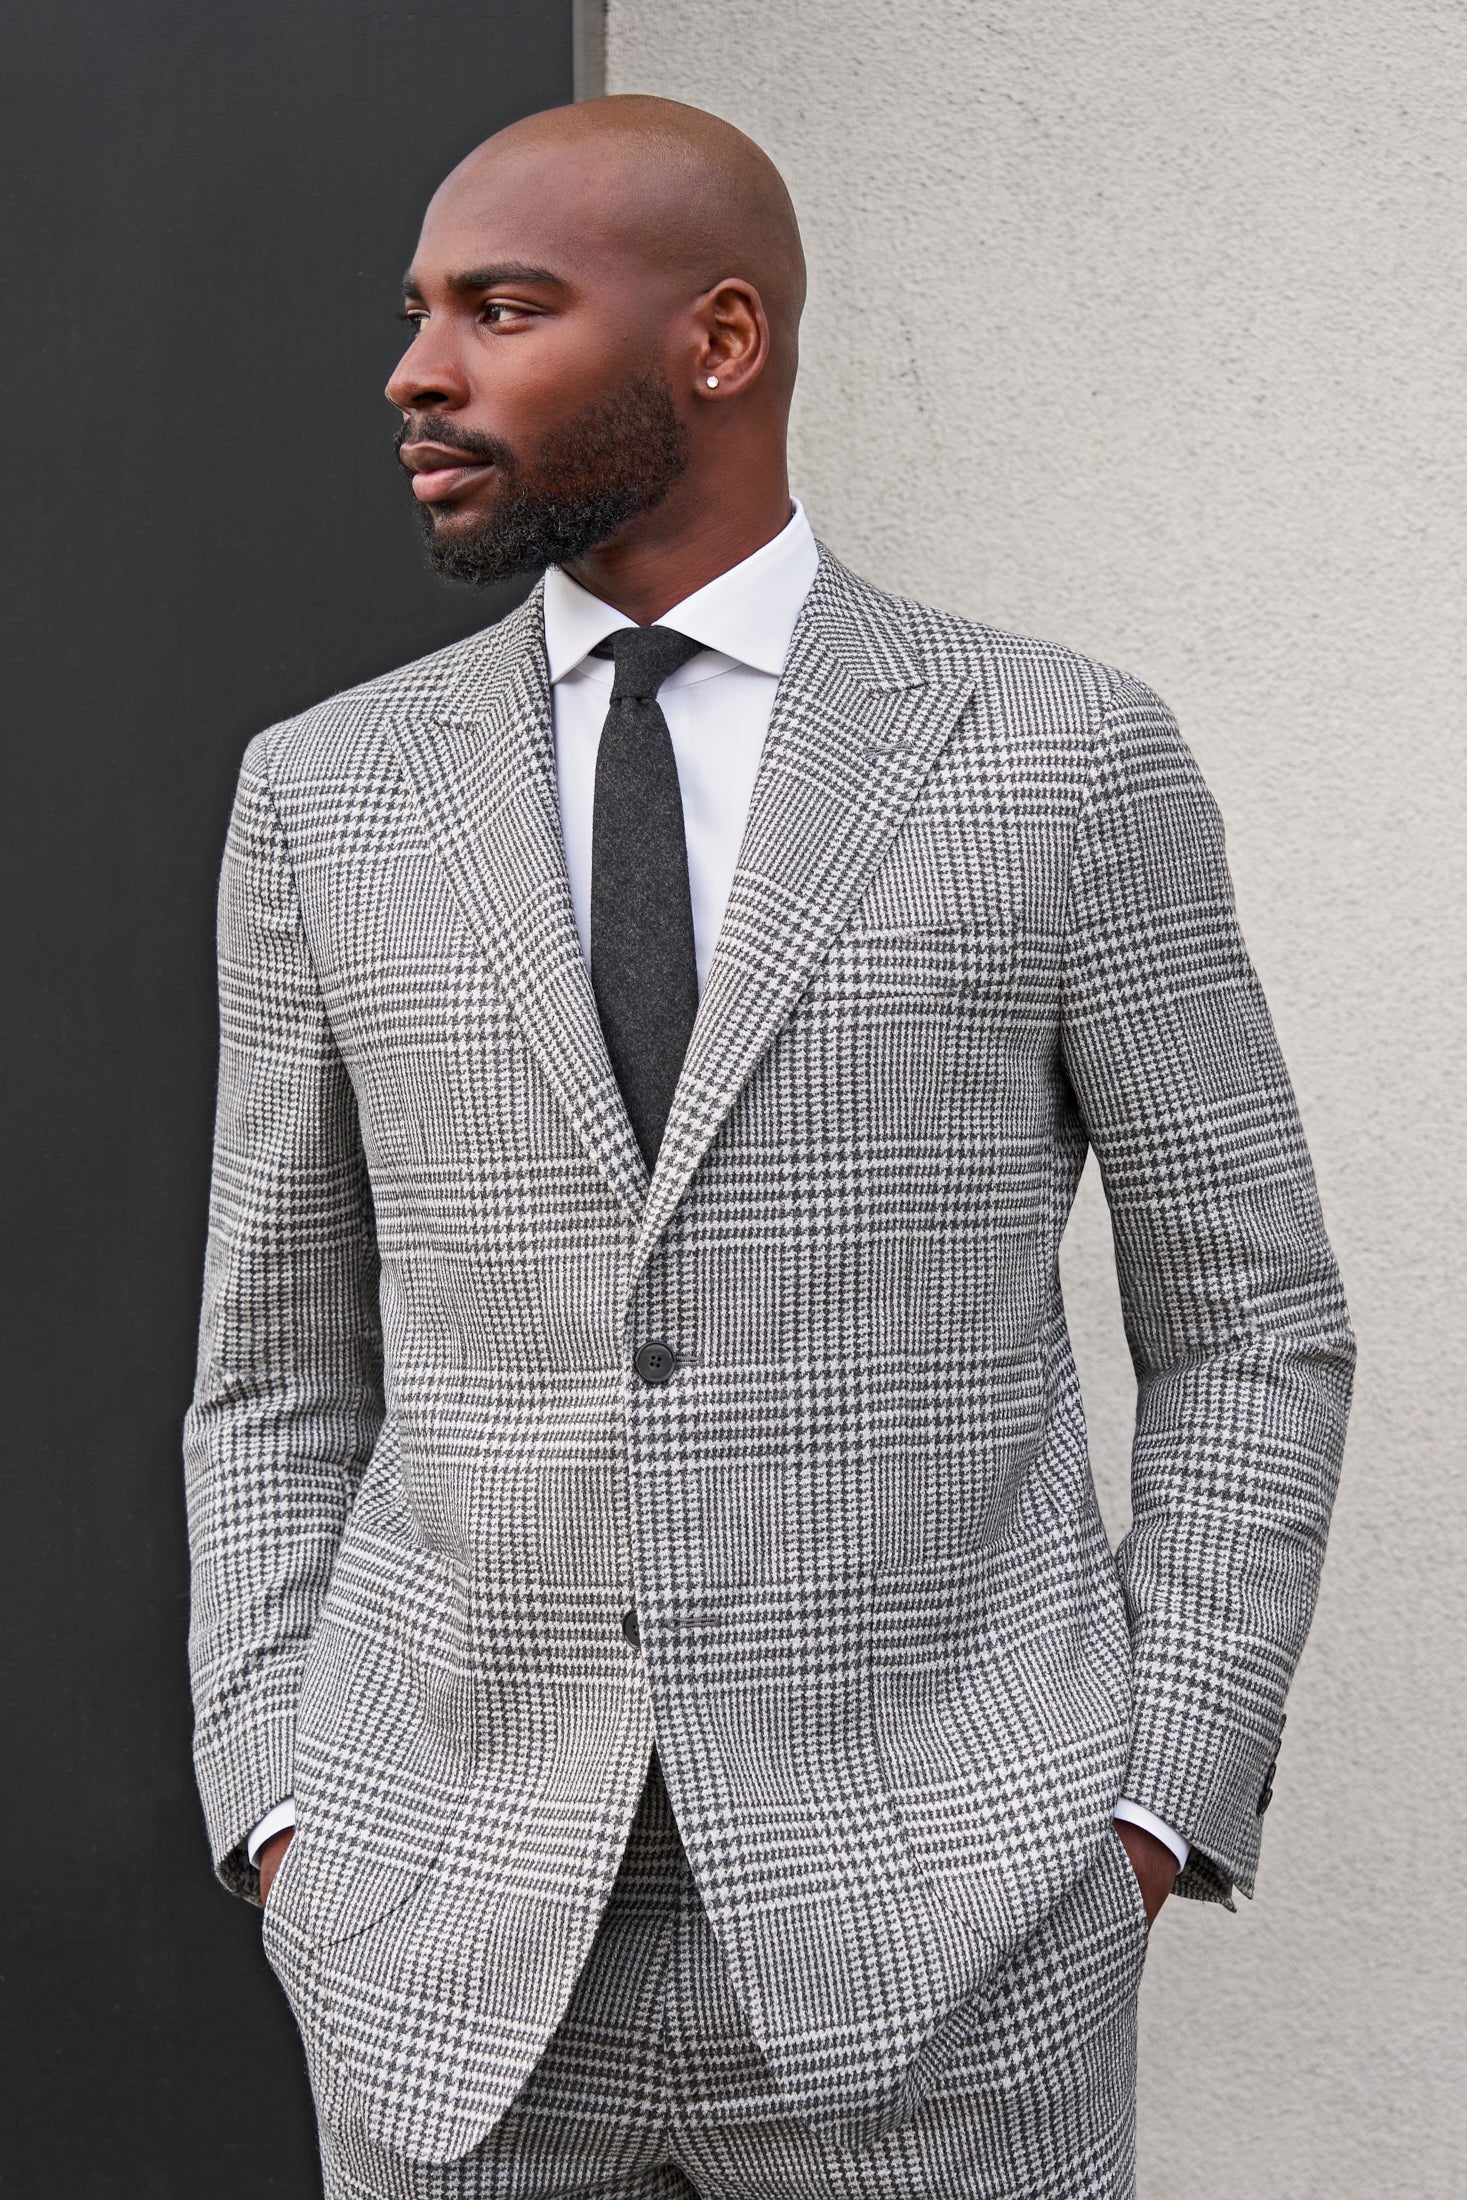 New SUITREVIEW Elmhurst Off White Storm Gray Check Wool and Silk Suit - Size 40R (Relaxed Fit)